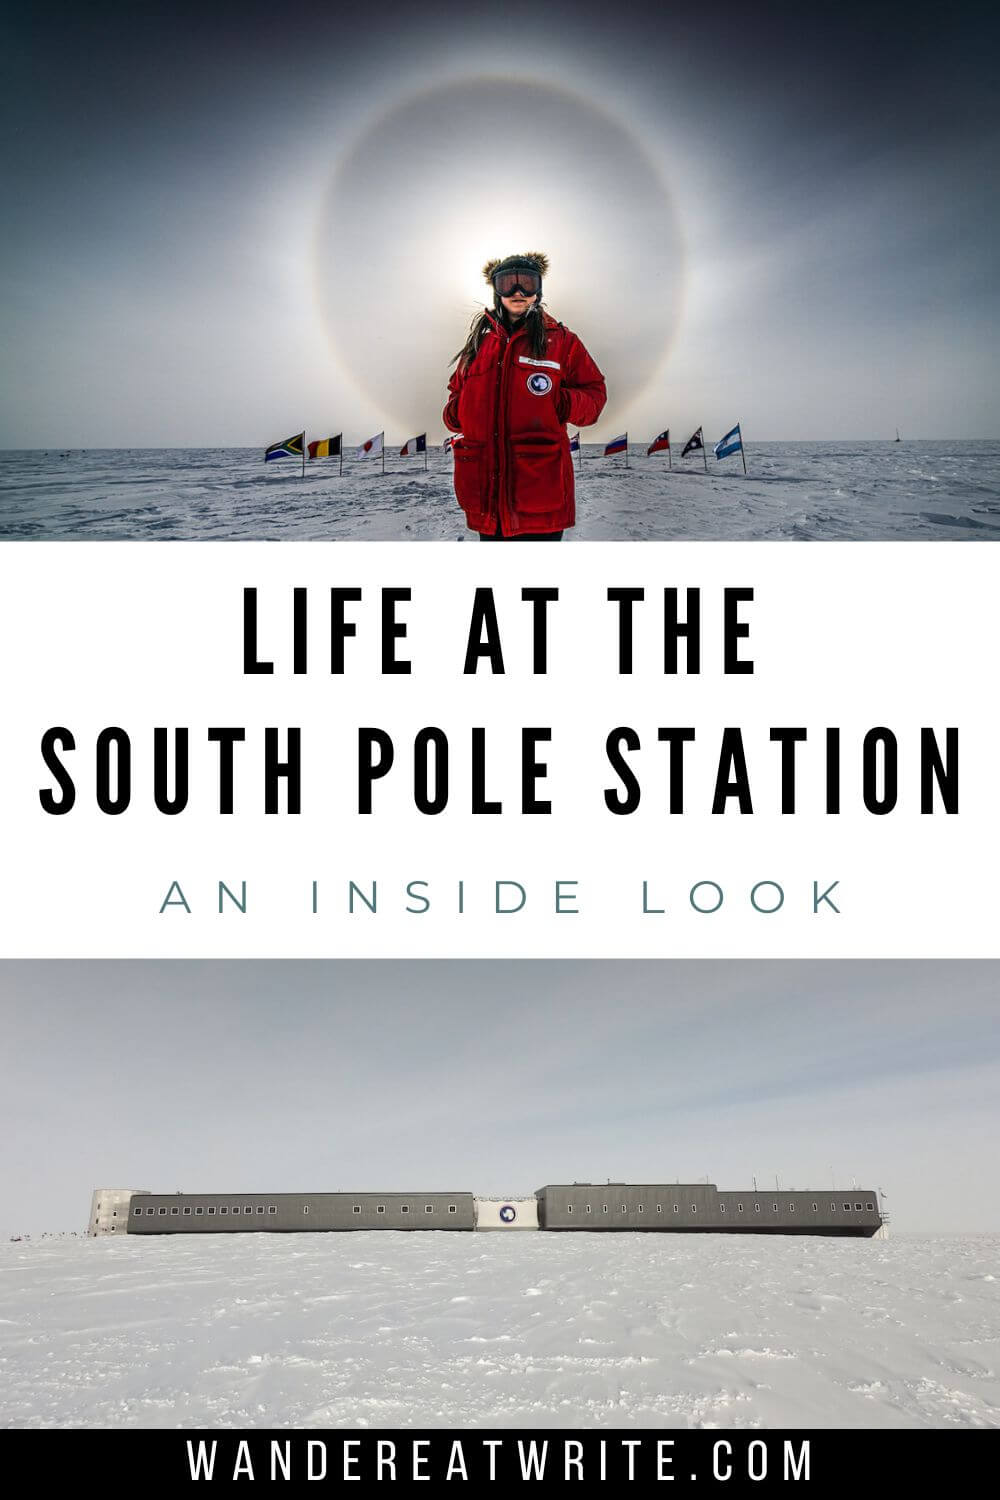 Pin text: Life at the South Pole Station-- an inside look. Top photo: girl wearing USAP Big Red Parka in front of the ceremonial South Pole. There are flags behind her and a sundog overhead. Bottom photo: exterior of Amundsen-Scott South Pole Station.